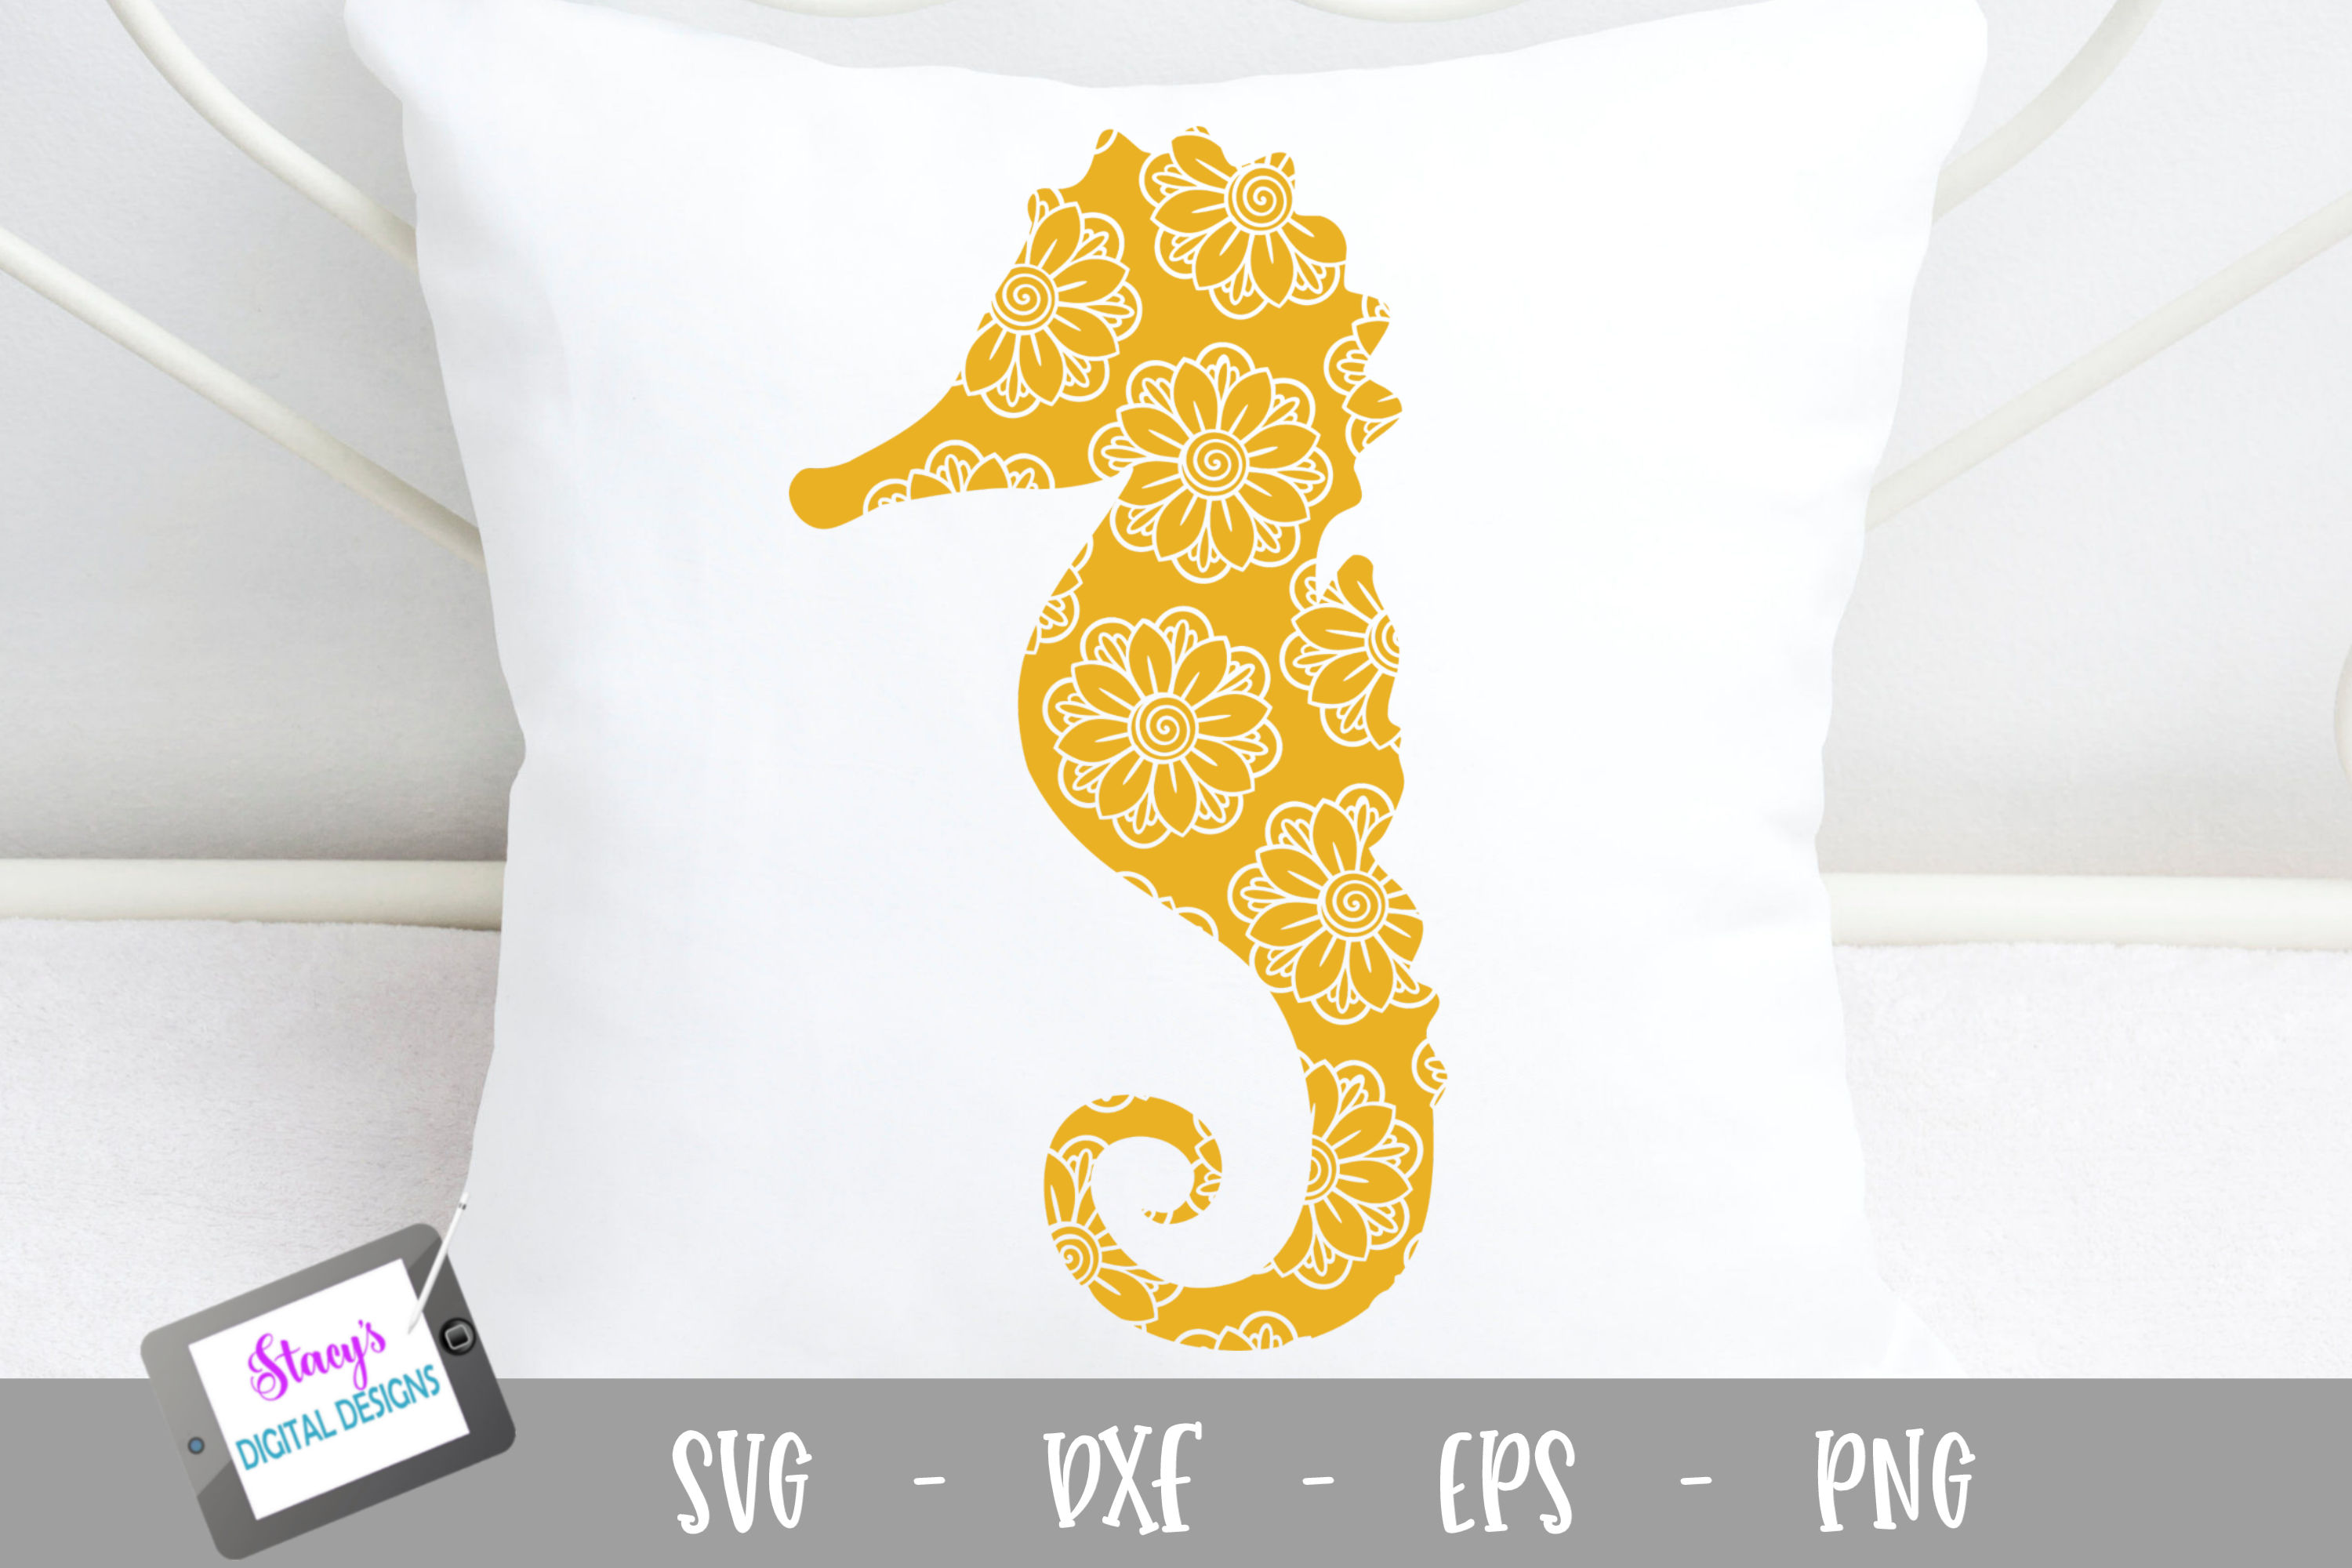 Download Seahorse SVG - Seahorse with floral mandala pattern